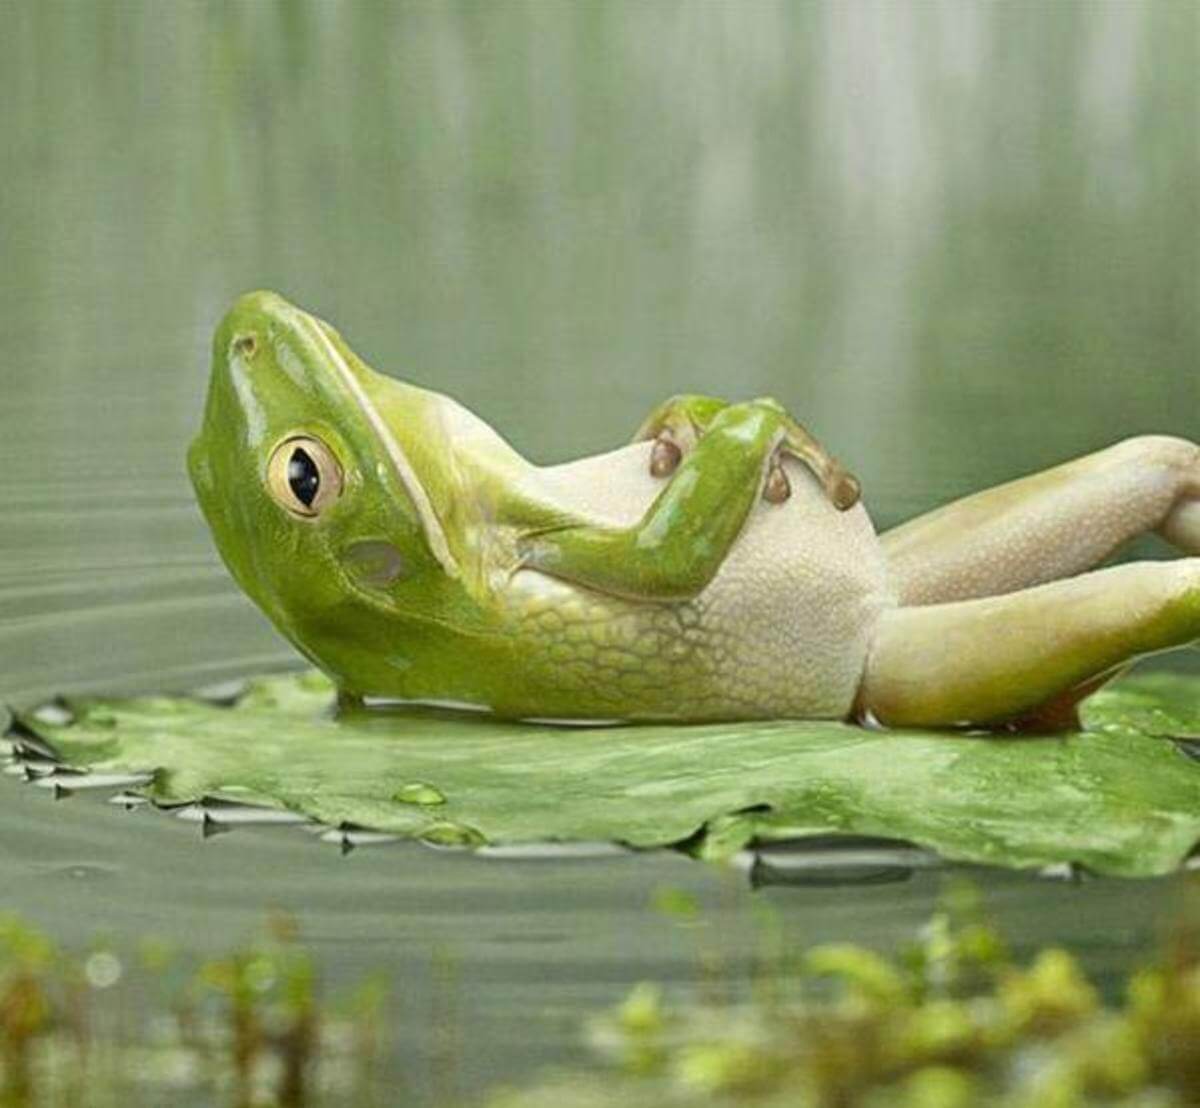 16 Pictures Of Chill Animals That Are So Cool I'm Catching a Cold